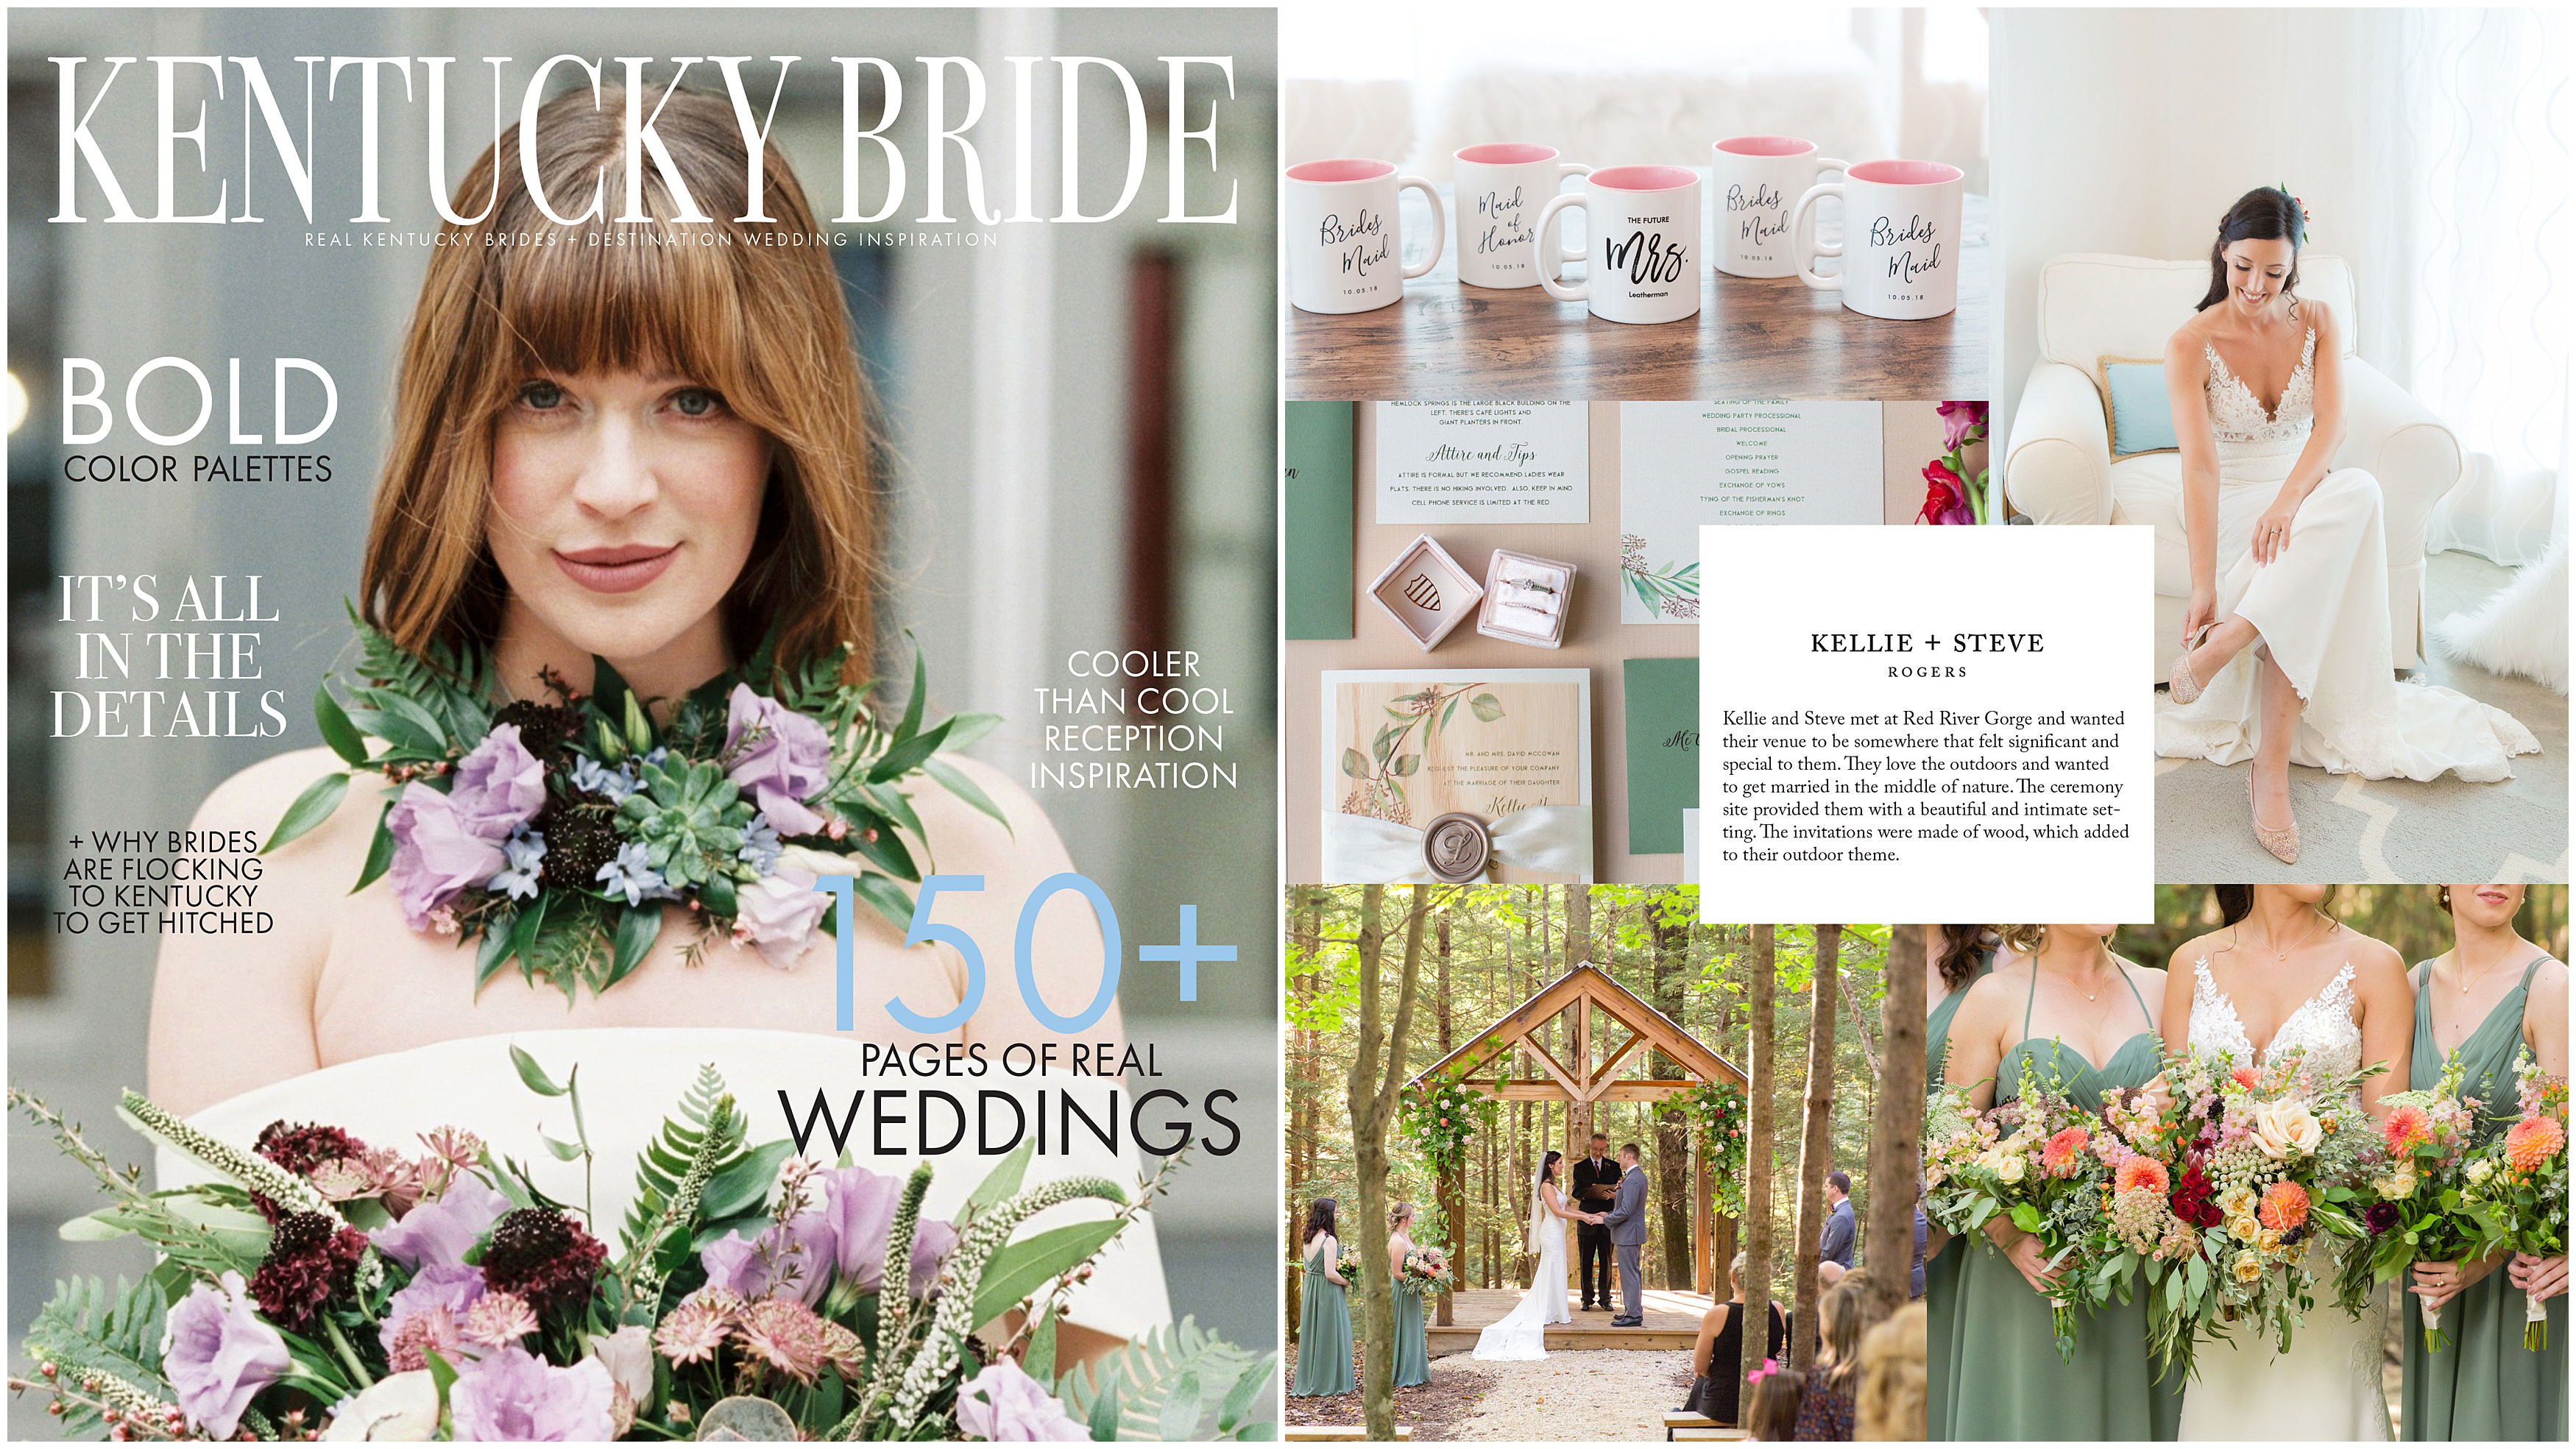 Kellie and Steve's wedding at Events at Hemlock Springs in the Red River Gorge featured in Kentucky Bride Magazine